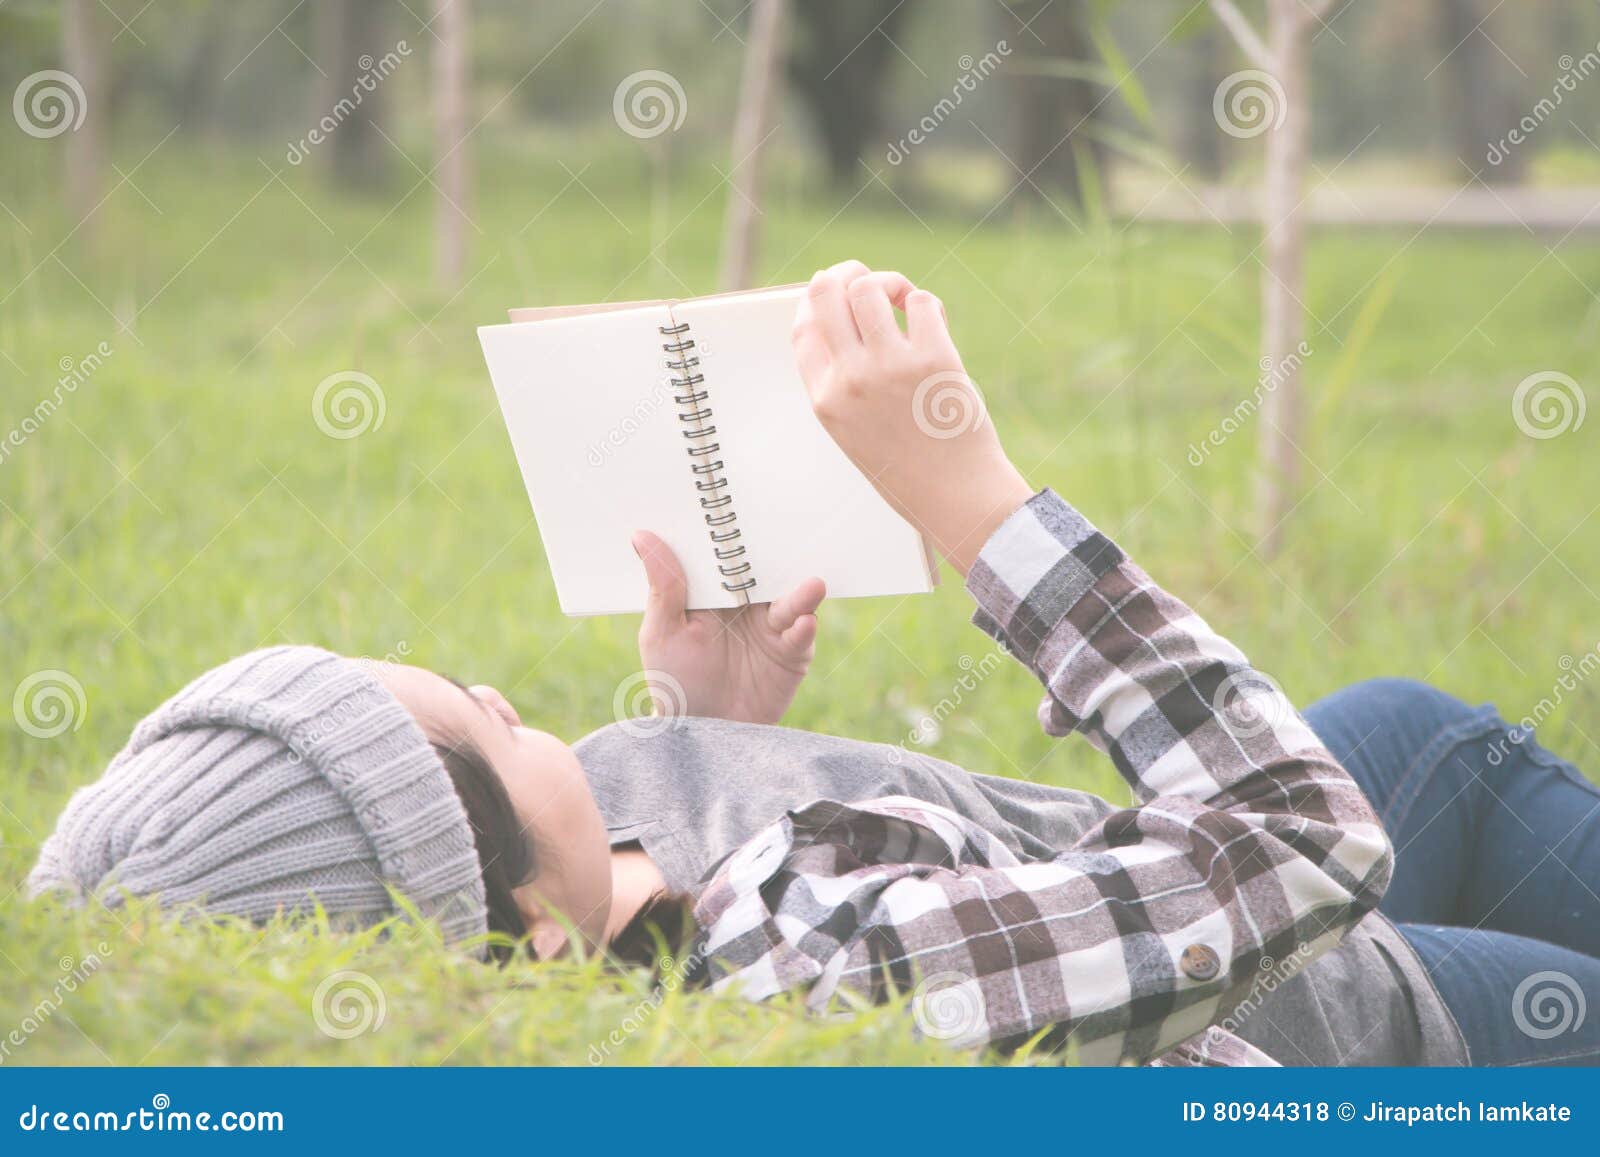 woman laying and lookin book in a park